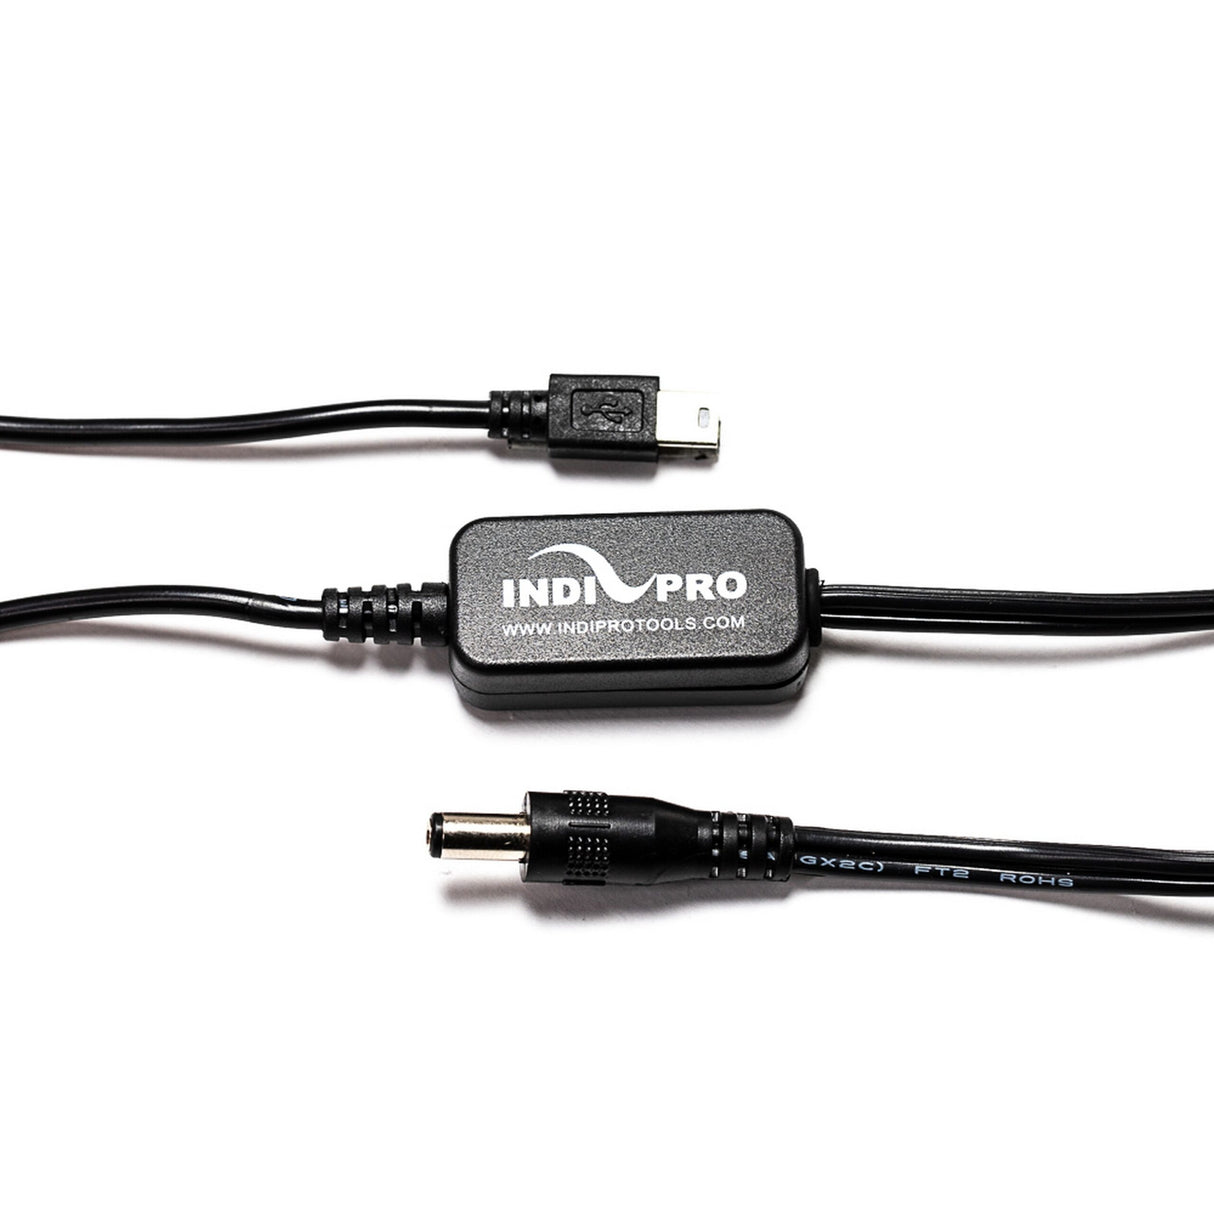 IndiPRO 21MUSB 2.1mm DC Barrel to Mini USB 5 VDC Power Regulated Cable, 20 Inch Cord